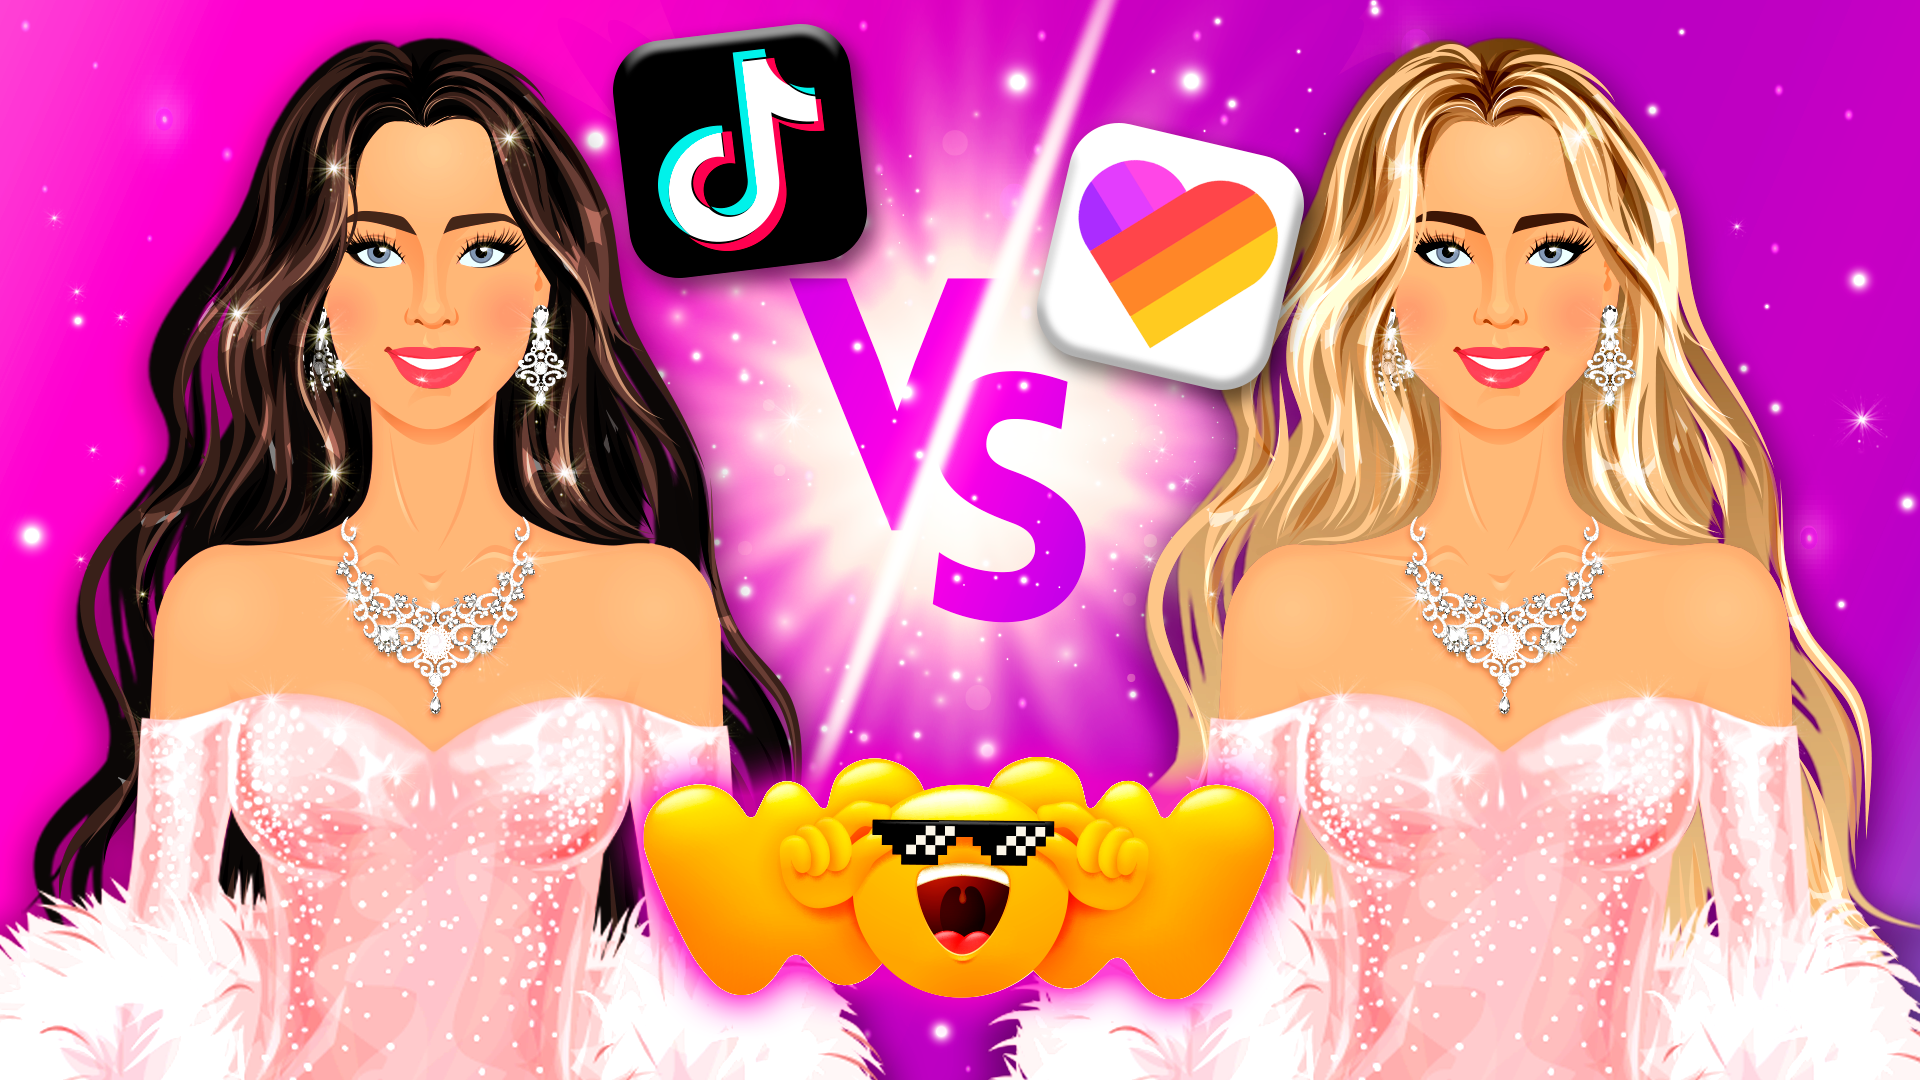 Girls Games - Play Free Online Games For Girls